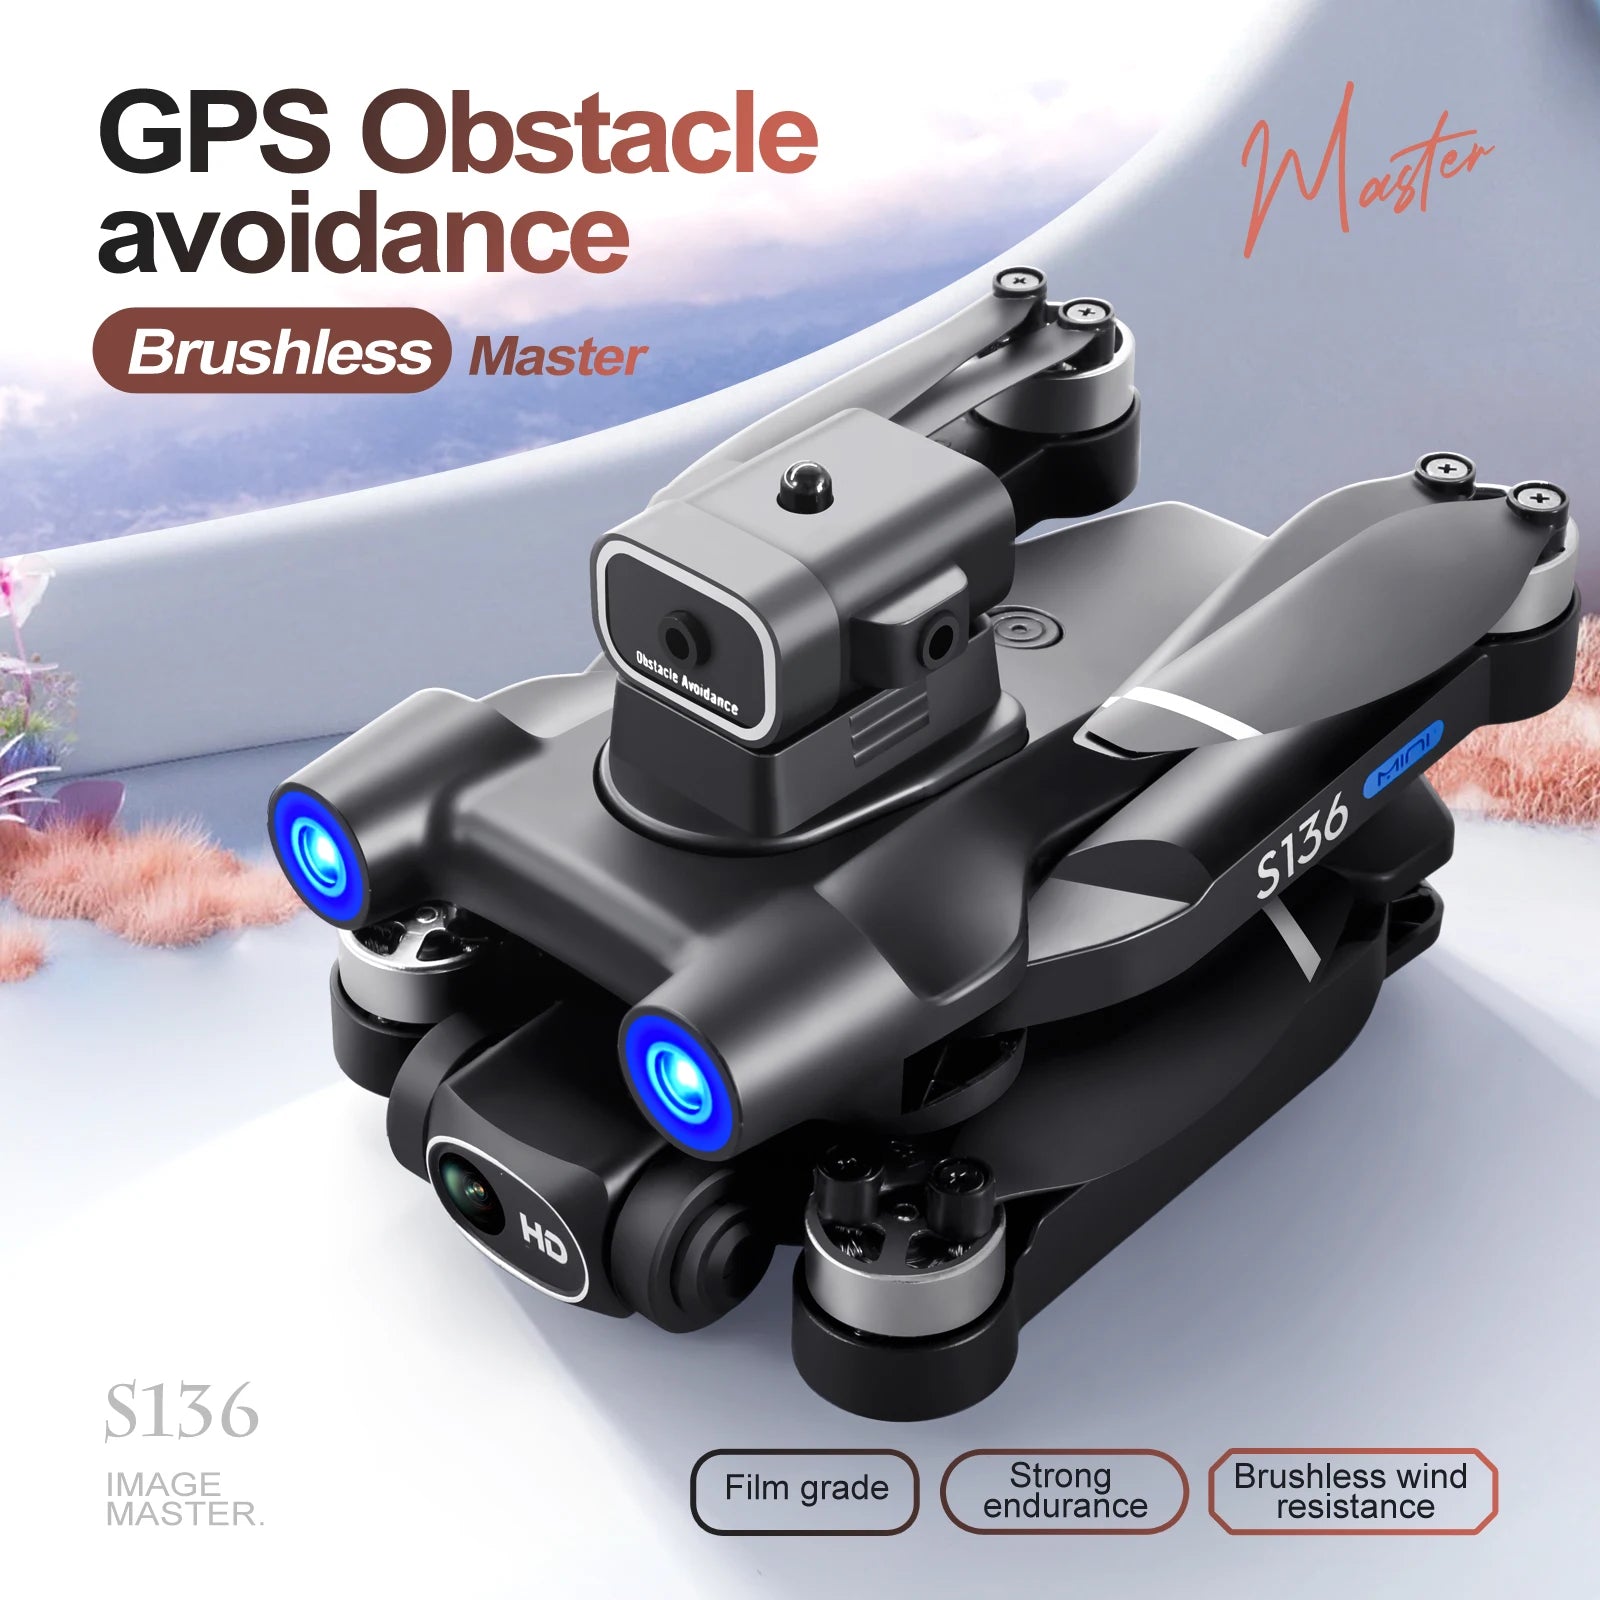 S136 GPS Drone, GPS Obstacle Mae avoidance Brushless Master S136 IMAGE Film grade end